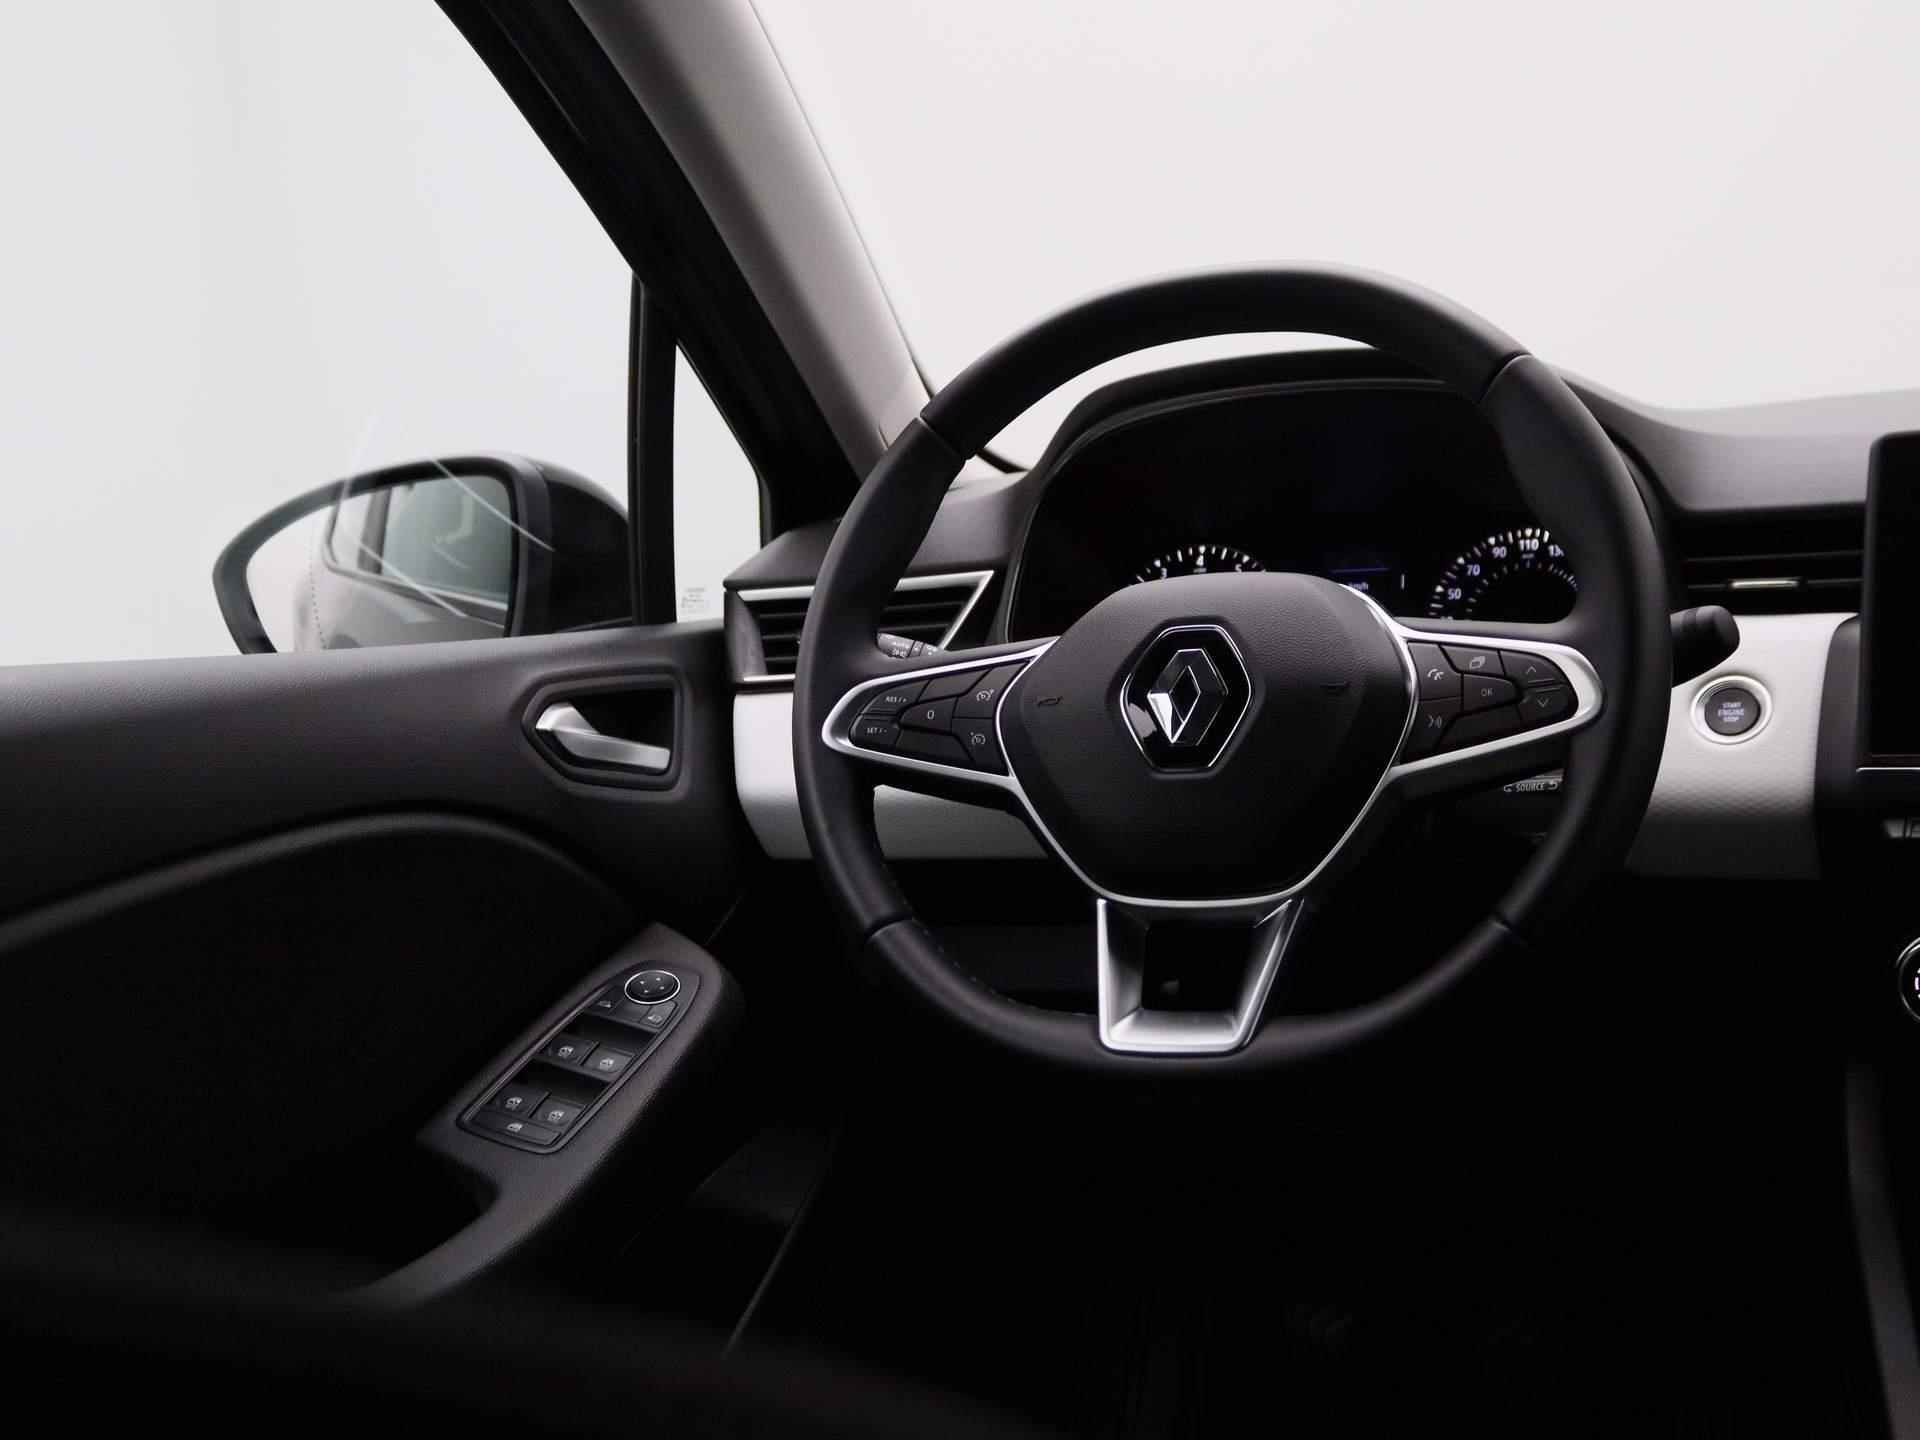 Renault Clio 1.0 TCe 90 Evolution | Climate Control | Full-Map Navigatie | Privacy Glass | PDC Achter | Keyless | 16" LMV | Apple Carplay & Android Auto - 11/35